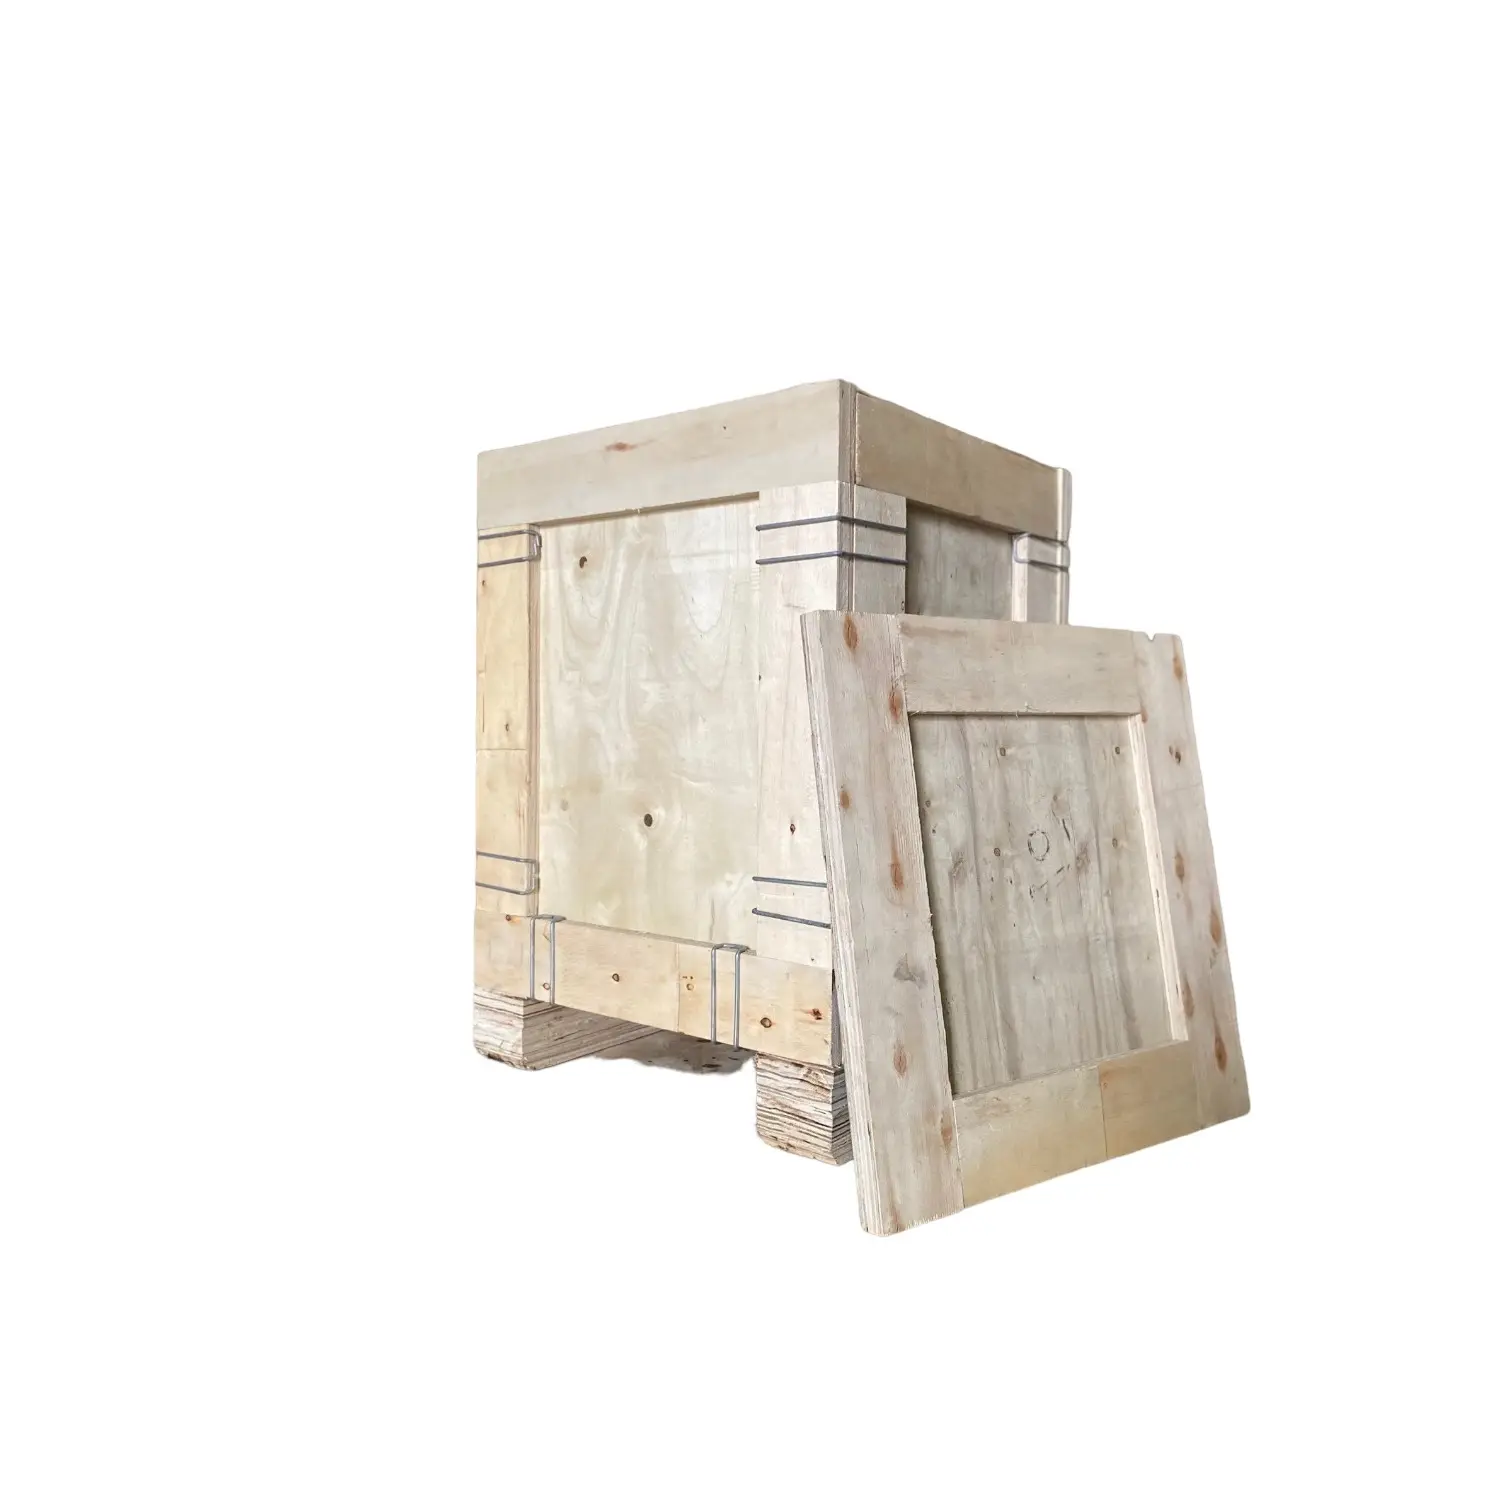 Logistic Wooden Storage Crate Recycled Materials Nailless Plywood Box Storage Vaults Bulk Purchase From Viet Nam Manufacturer